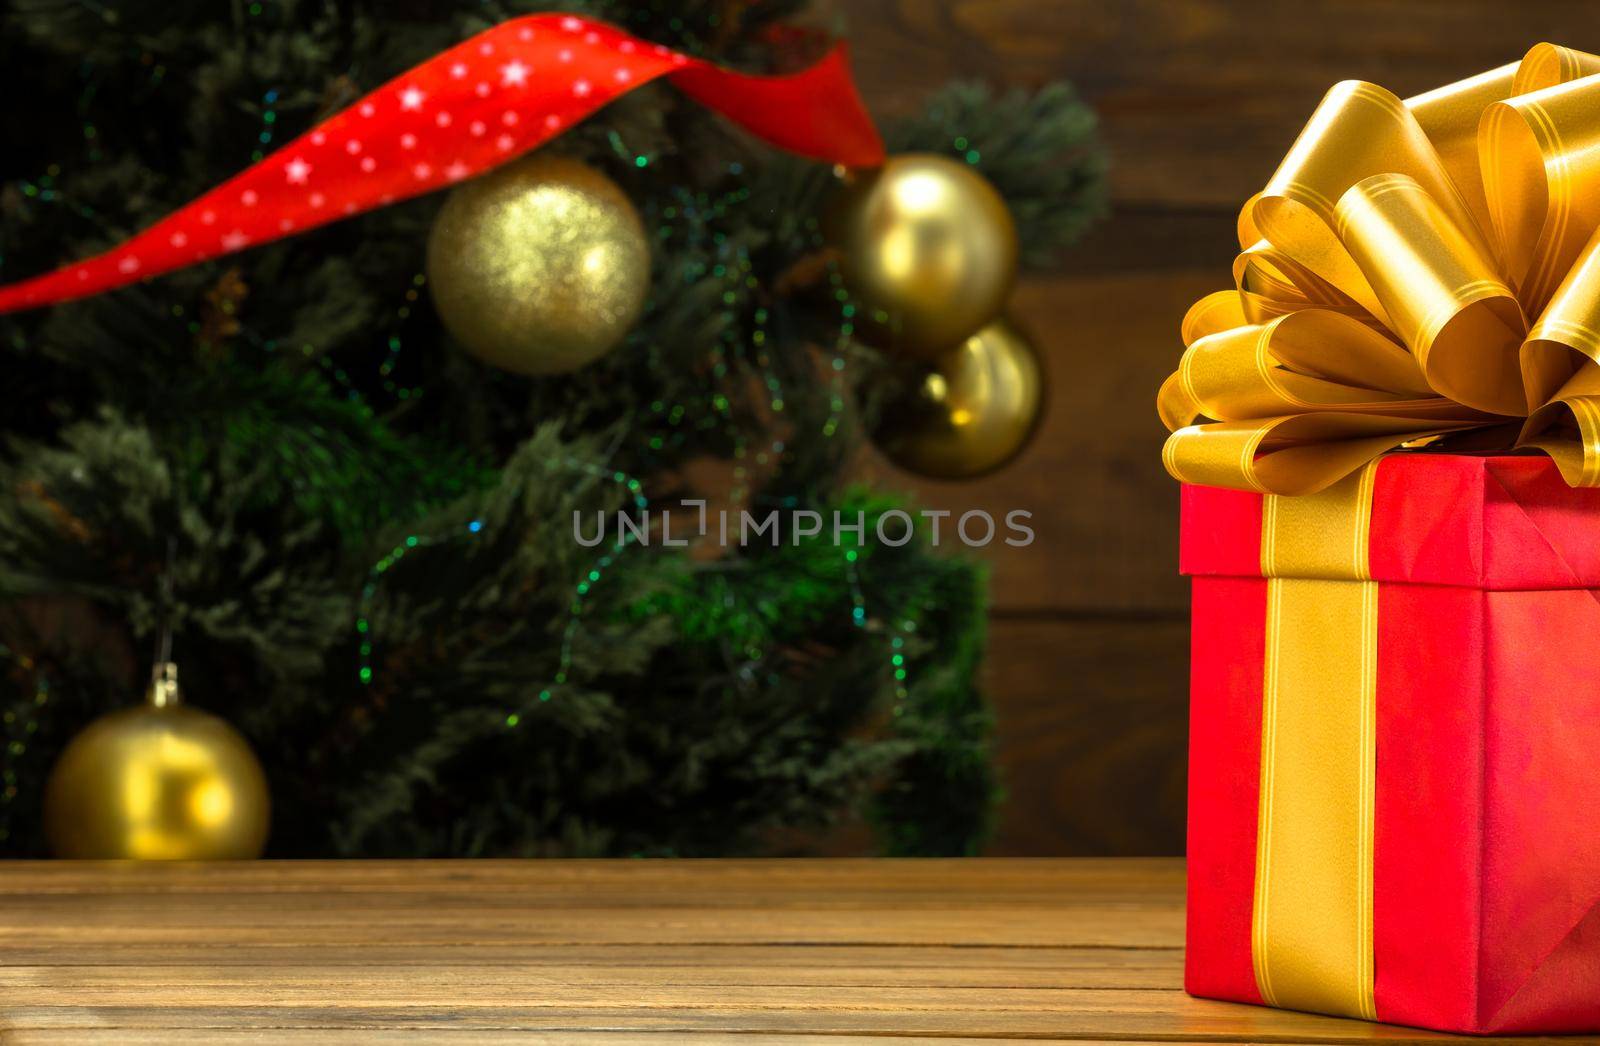 Christmas Gift in a Square Box with a Large Gold Bow Lies on the Table against the Background of a Green Christmas Tree with Gold Balls, Holiday Garlands and a Red Ribbon with Stars. Copy Space. Close-up. High quality photo